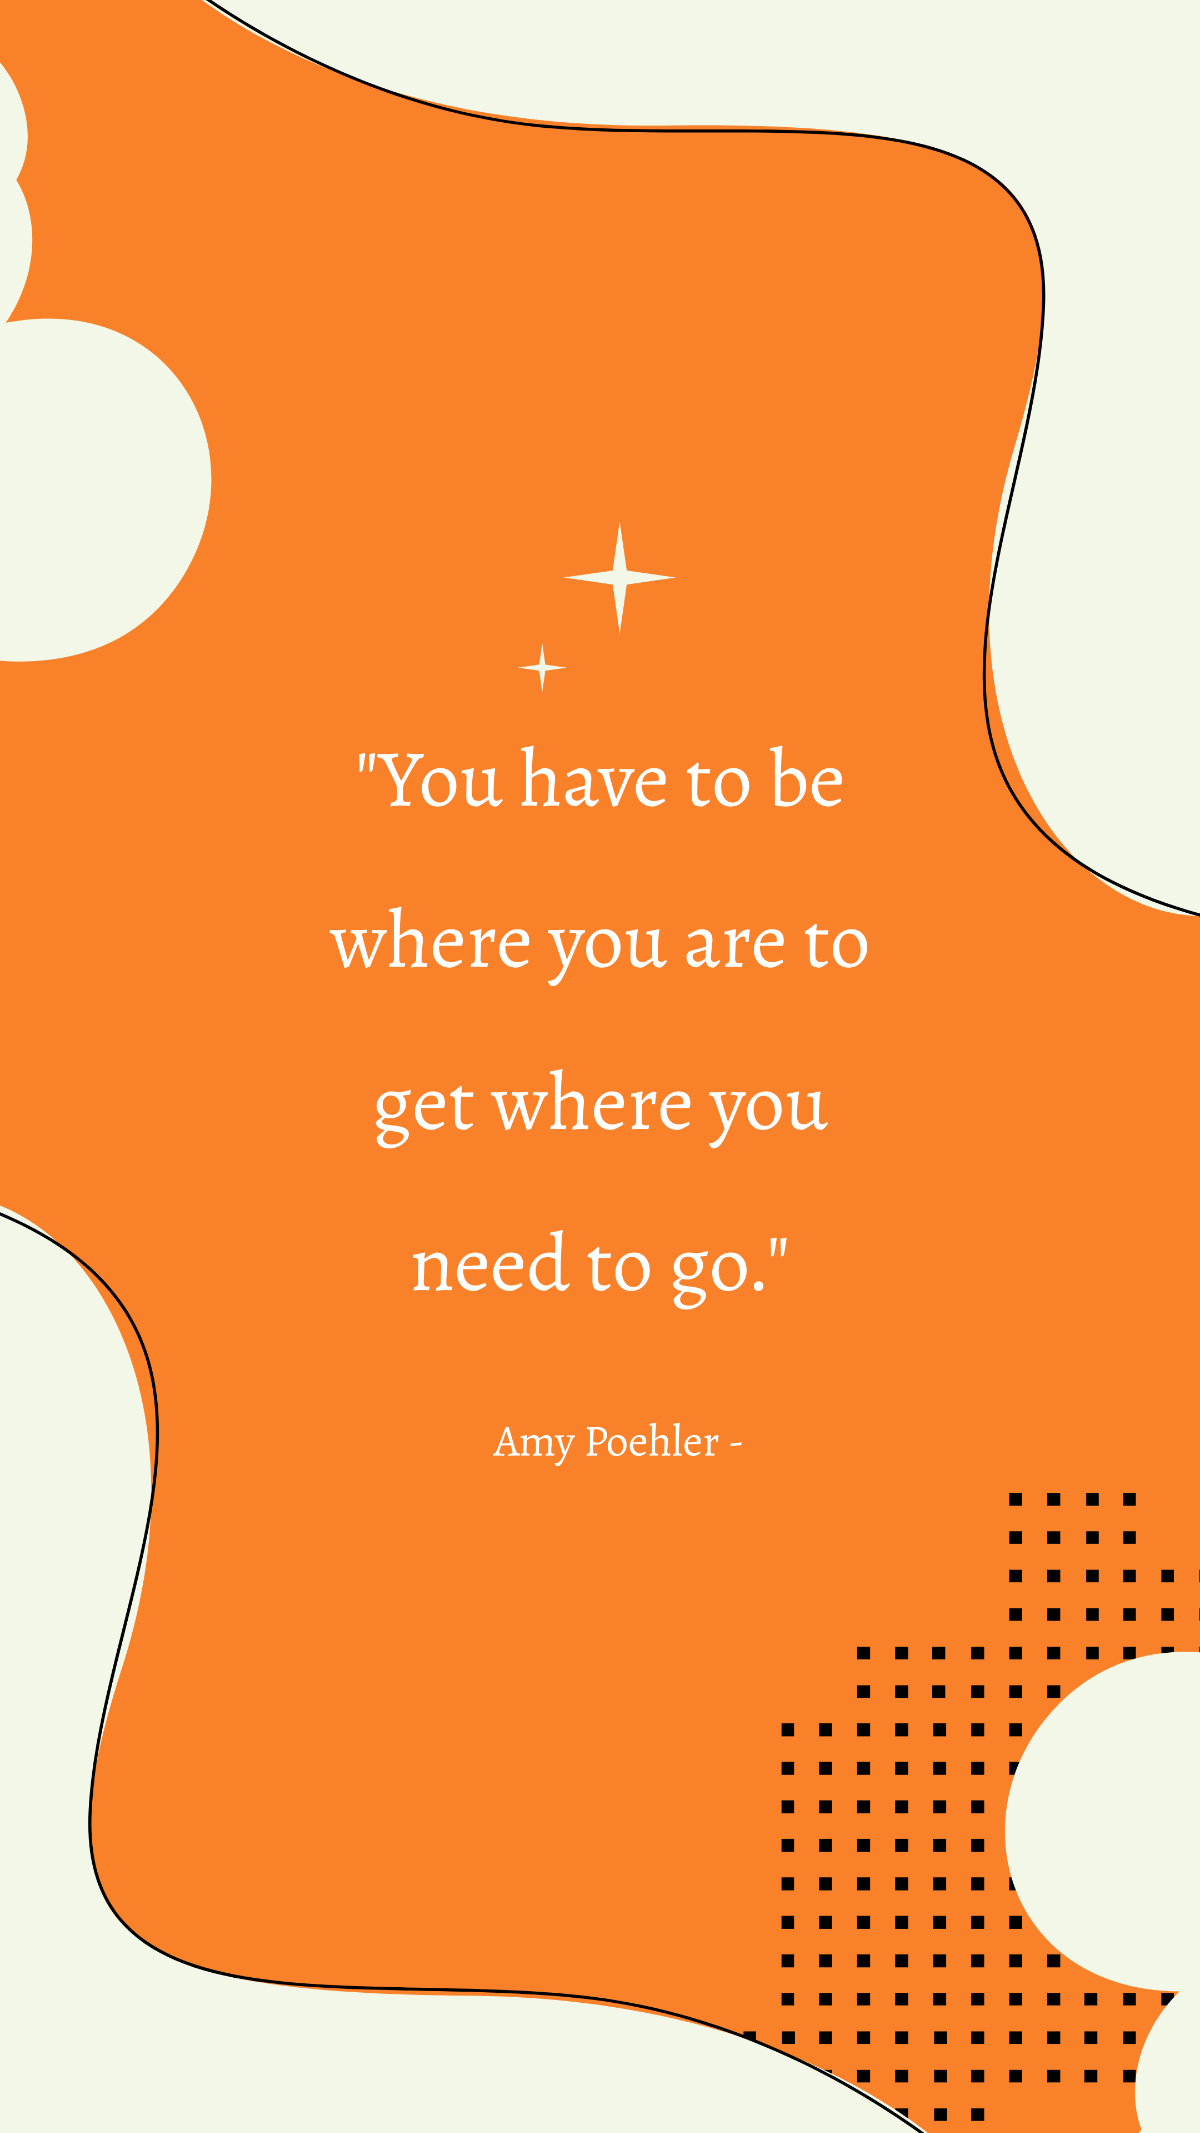 Amy Poehler - You have to be where you are to get where you need to go. Template